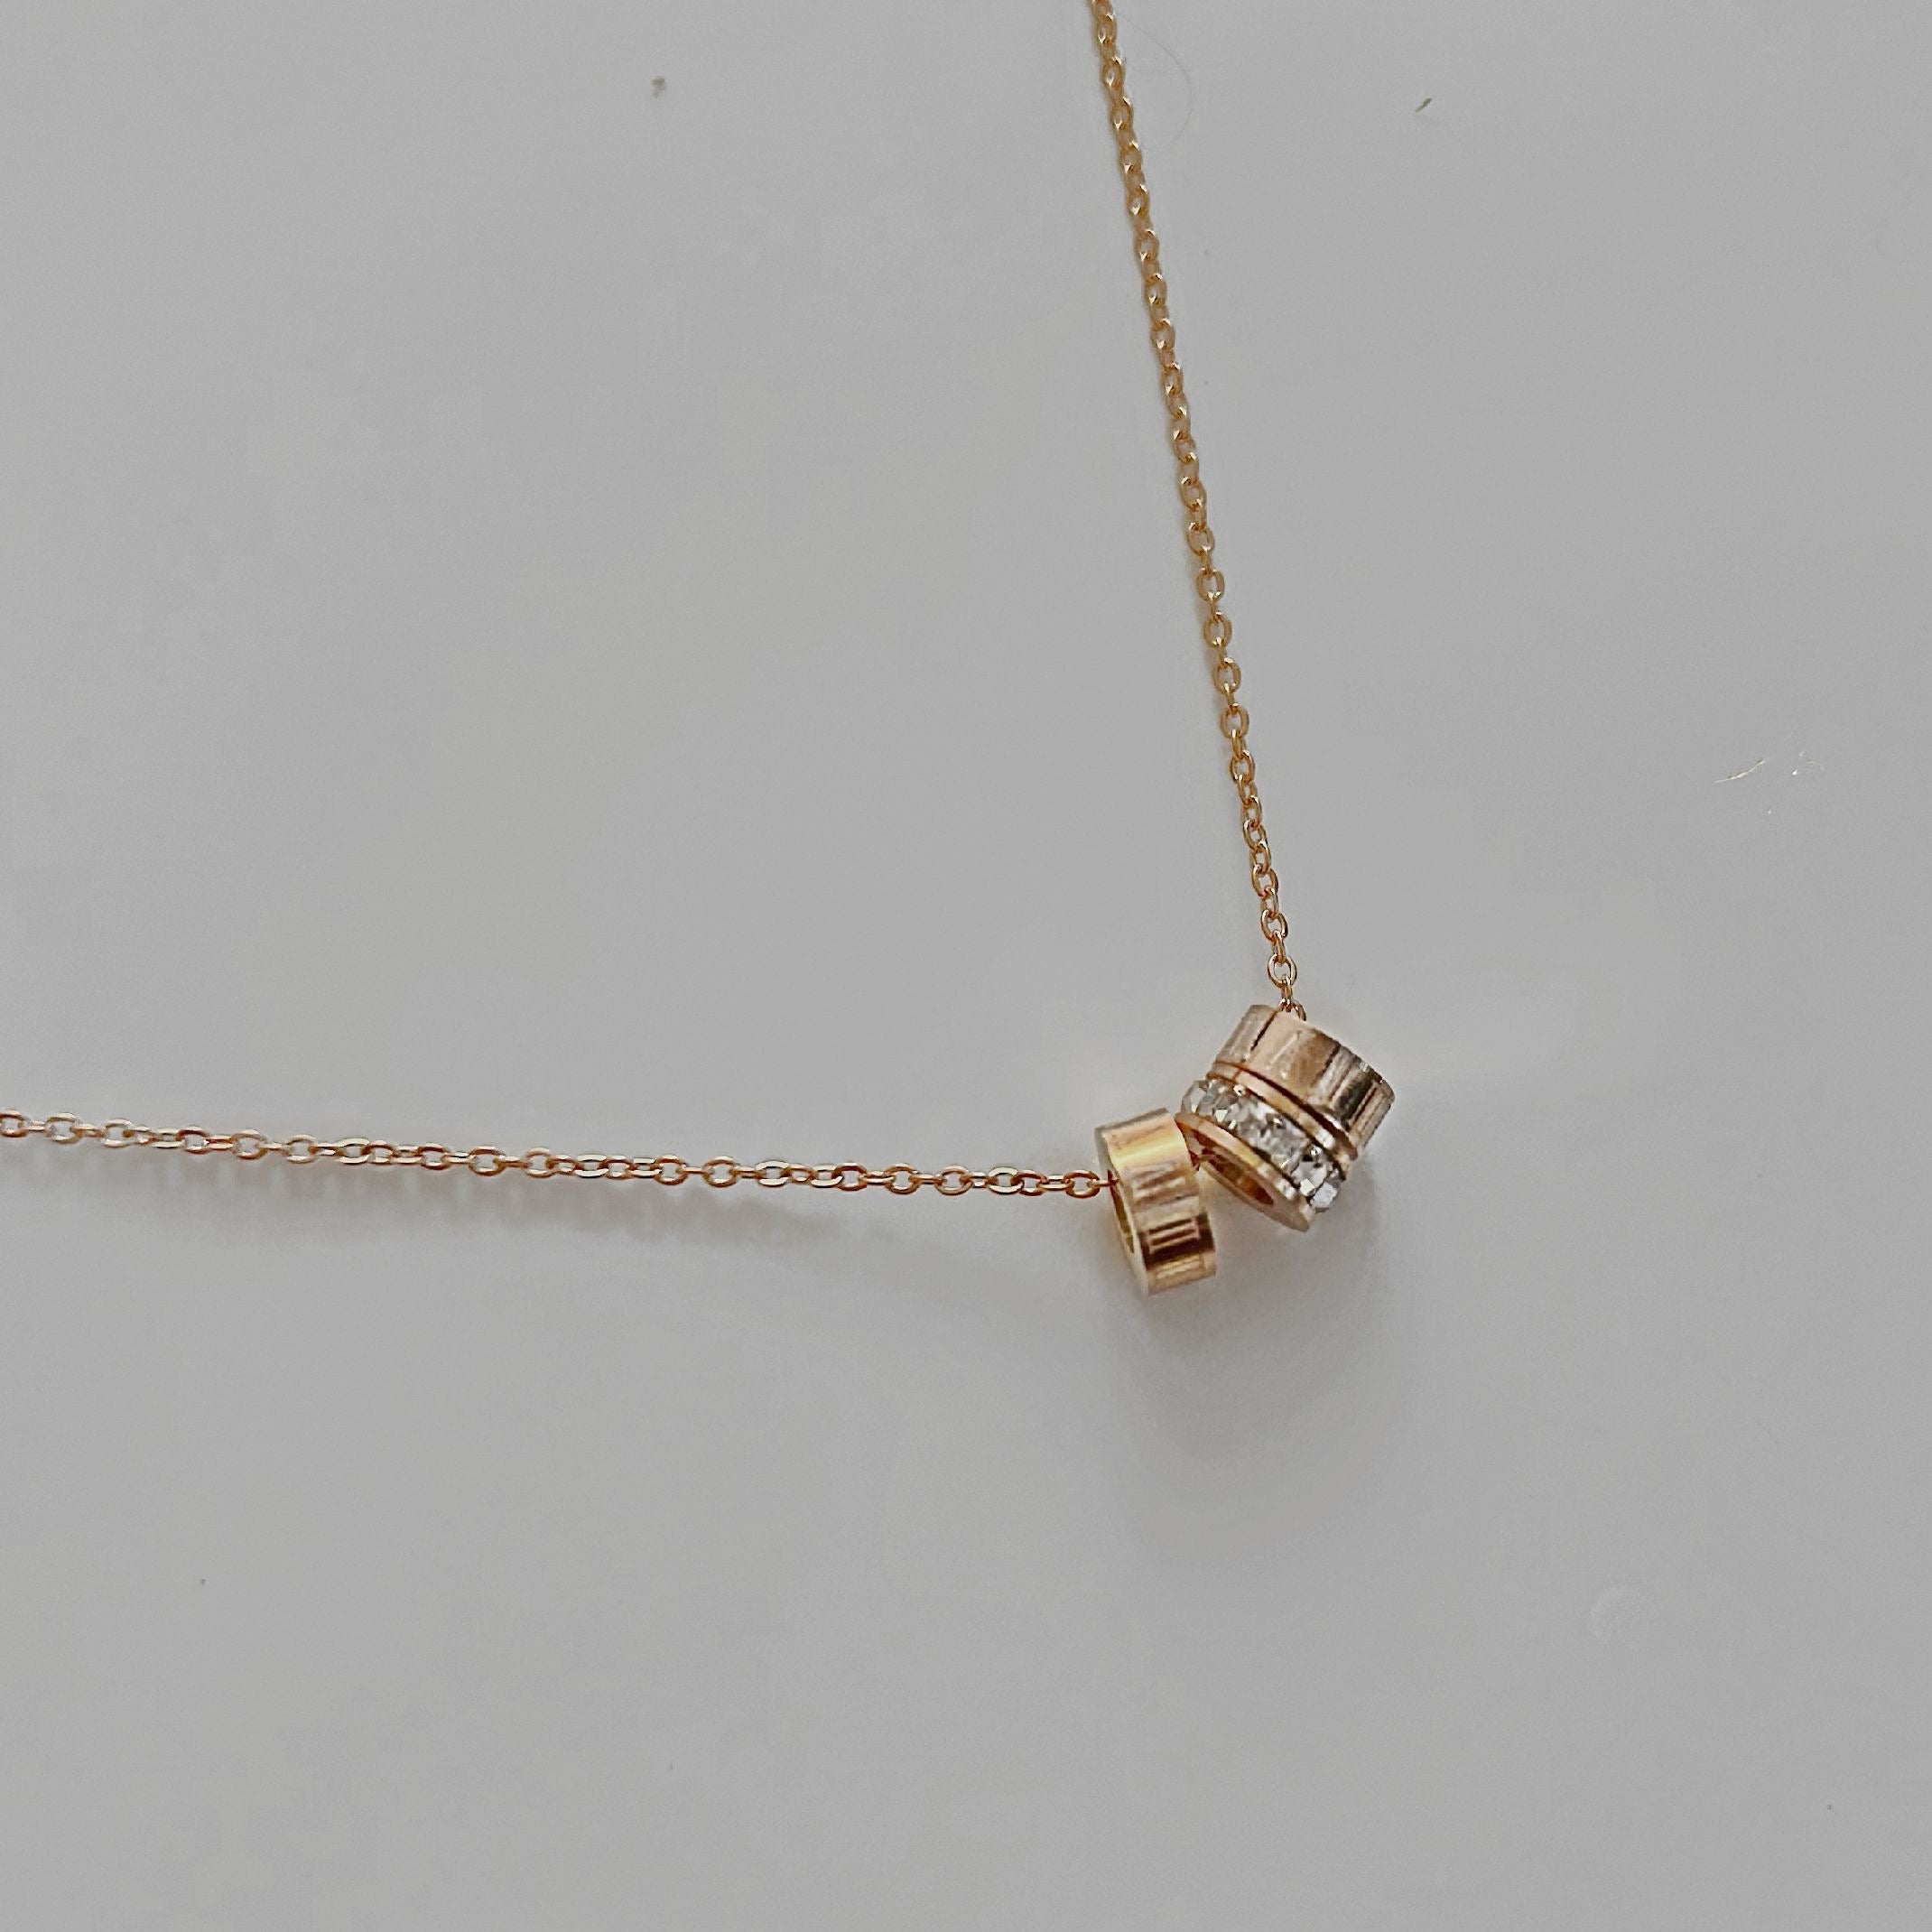 Rose gold diamond ring necklace 